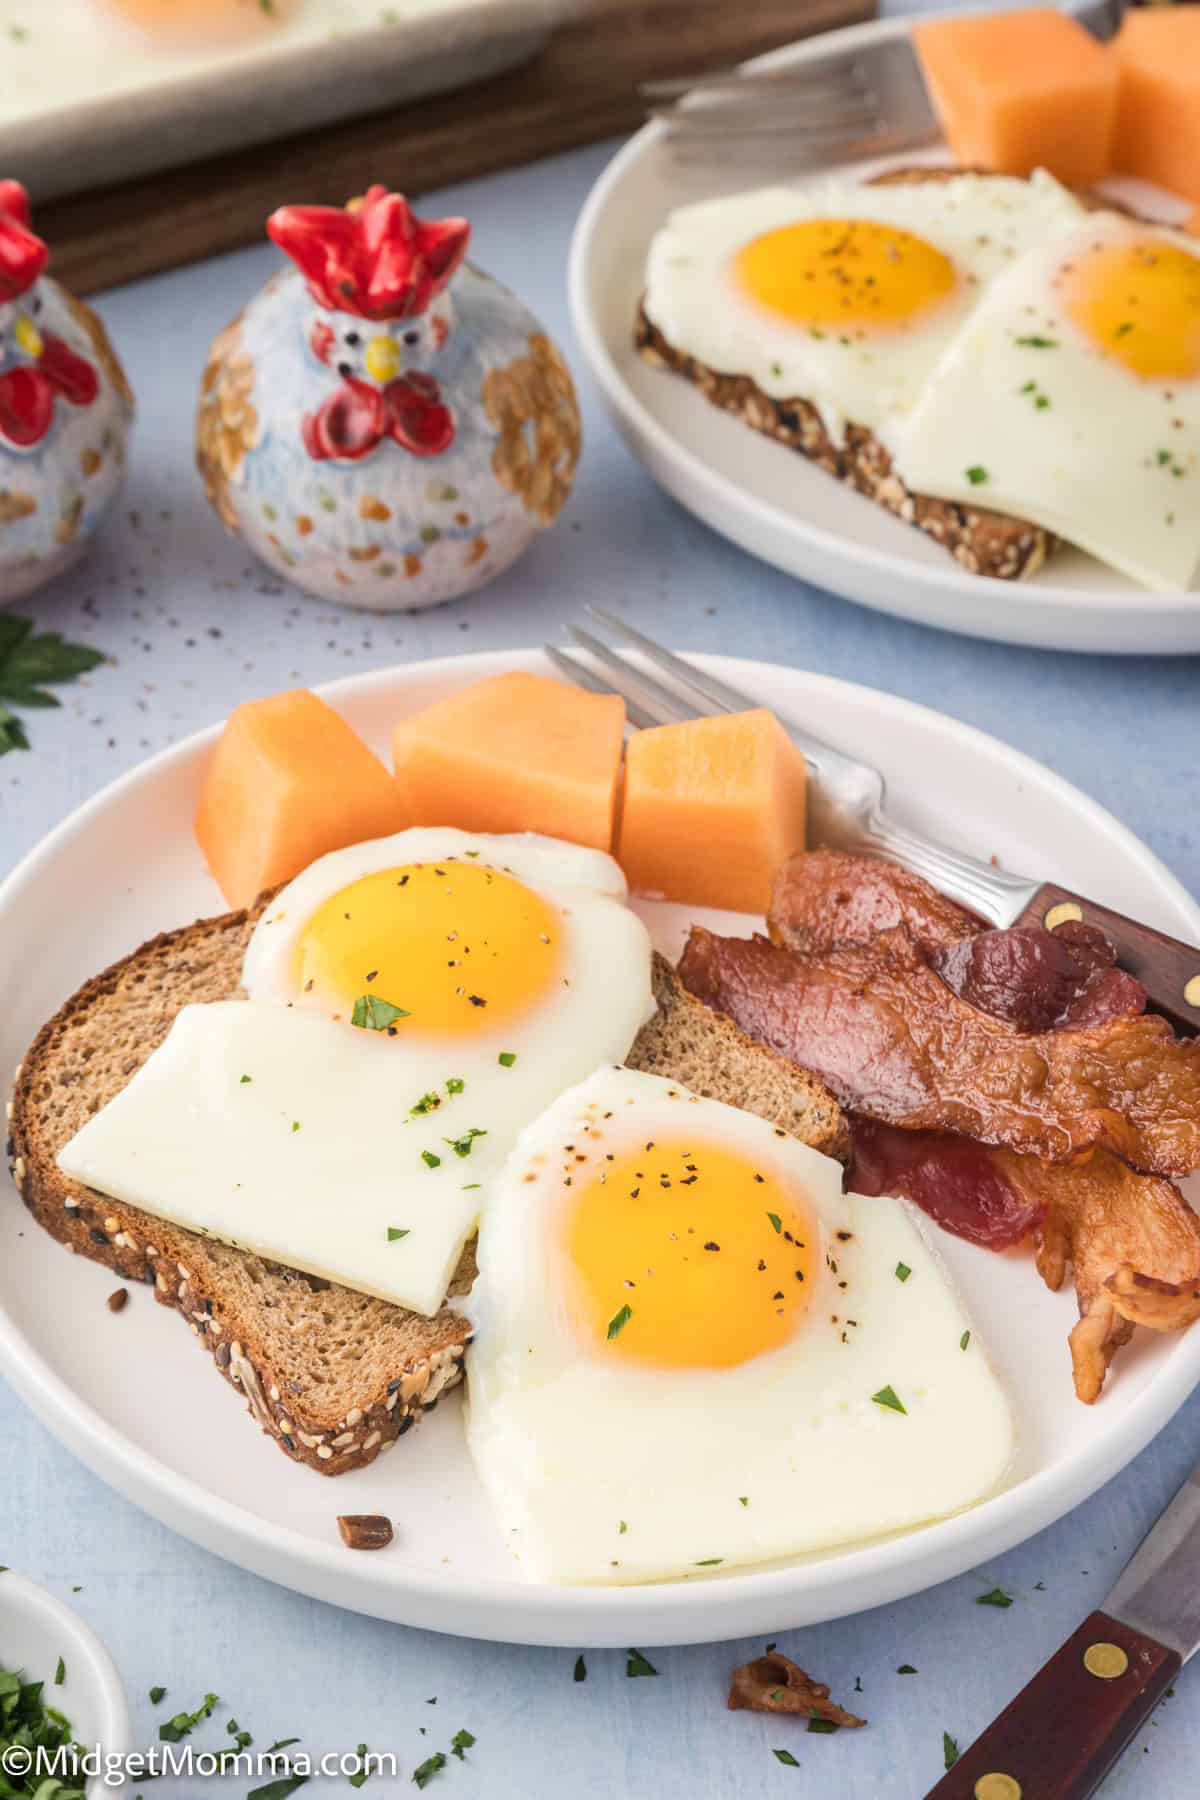 A plate with two slices of toast topped with sunny-side-up eggs, slices of cantaloupe, and crispy bacon, accompanied by salt and pepper shakers shaped like hens.